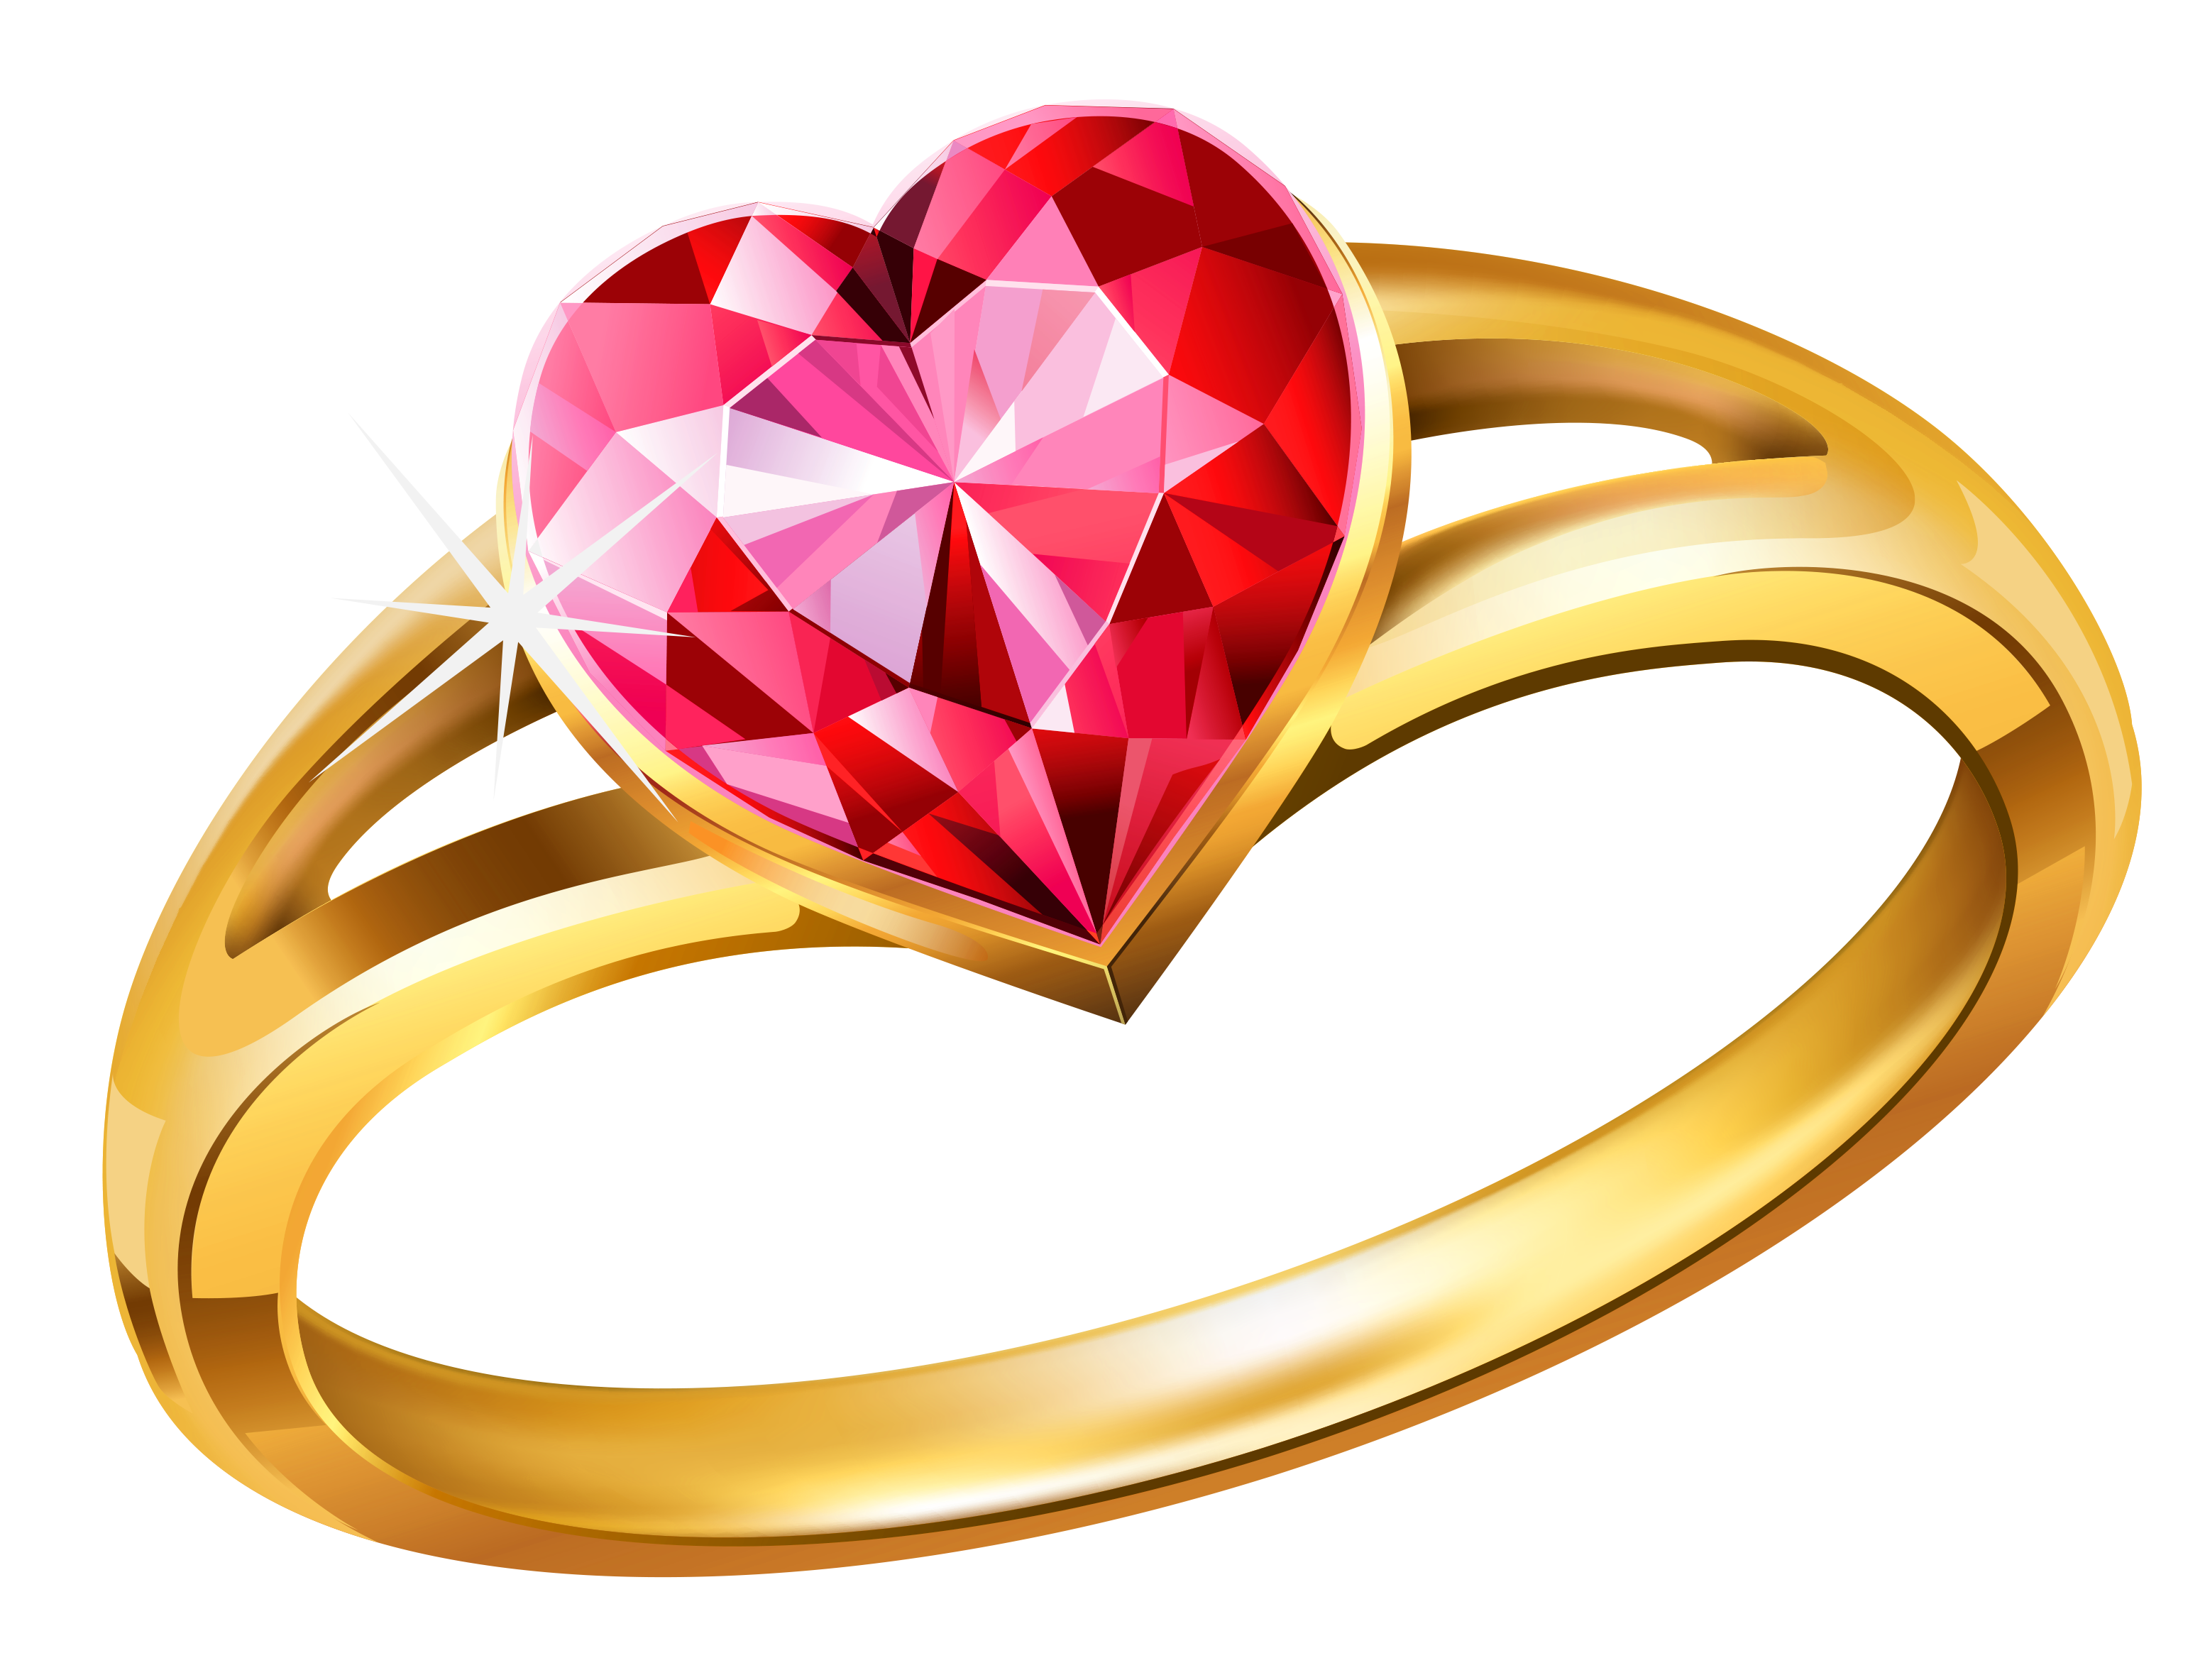 Diamond ring clip art free clipart images clipartcow